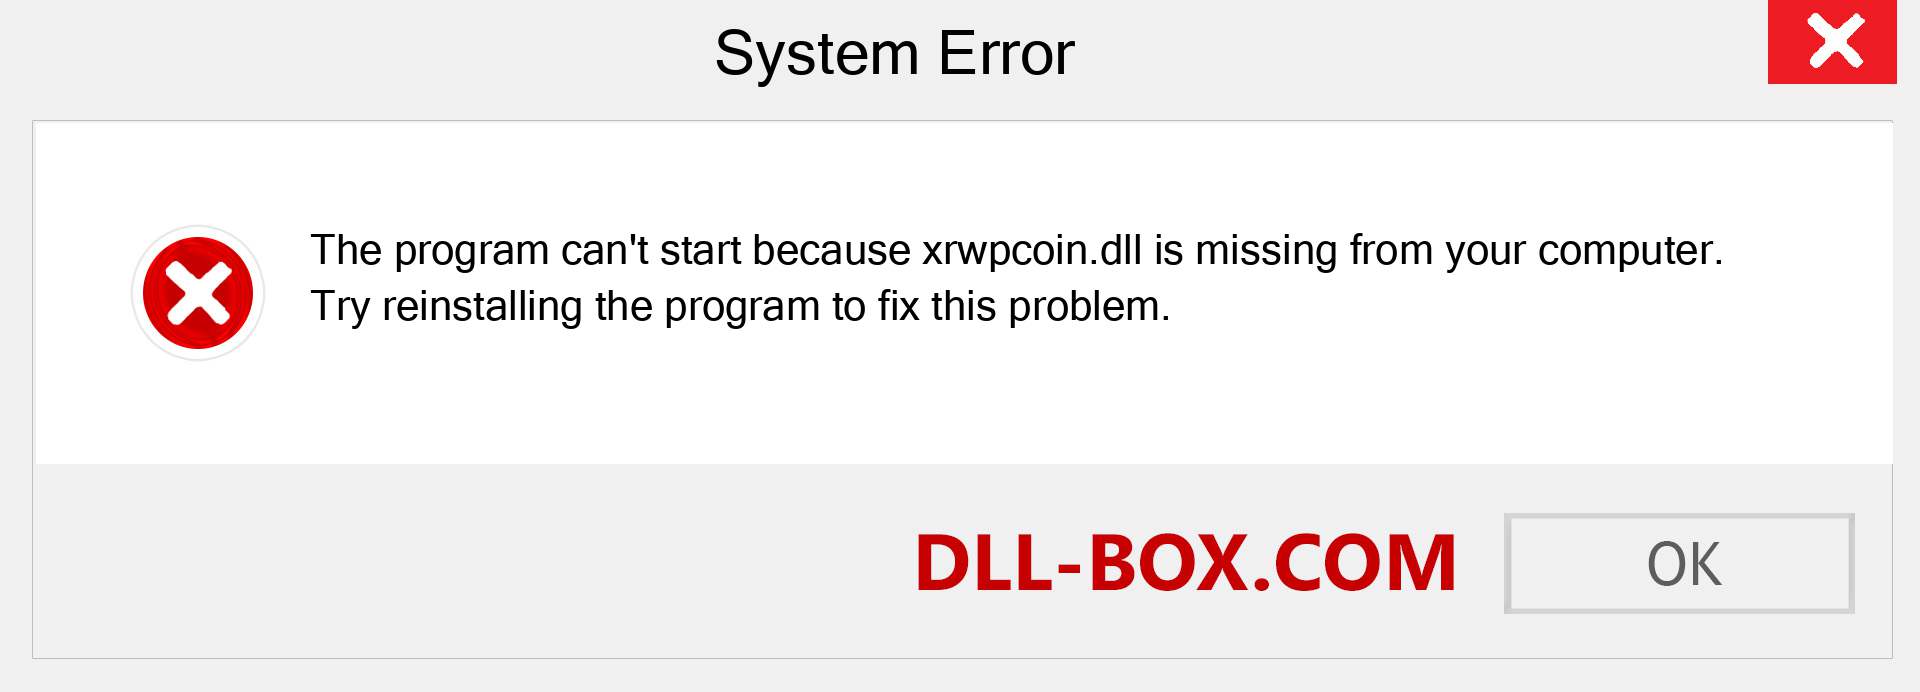  xrwpcoin.dll file is missing?. Download for Windows 7, 8, 10 - Fix  xrwpcoin dll Missing Error on Windows, photos, images